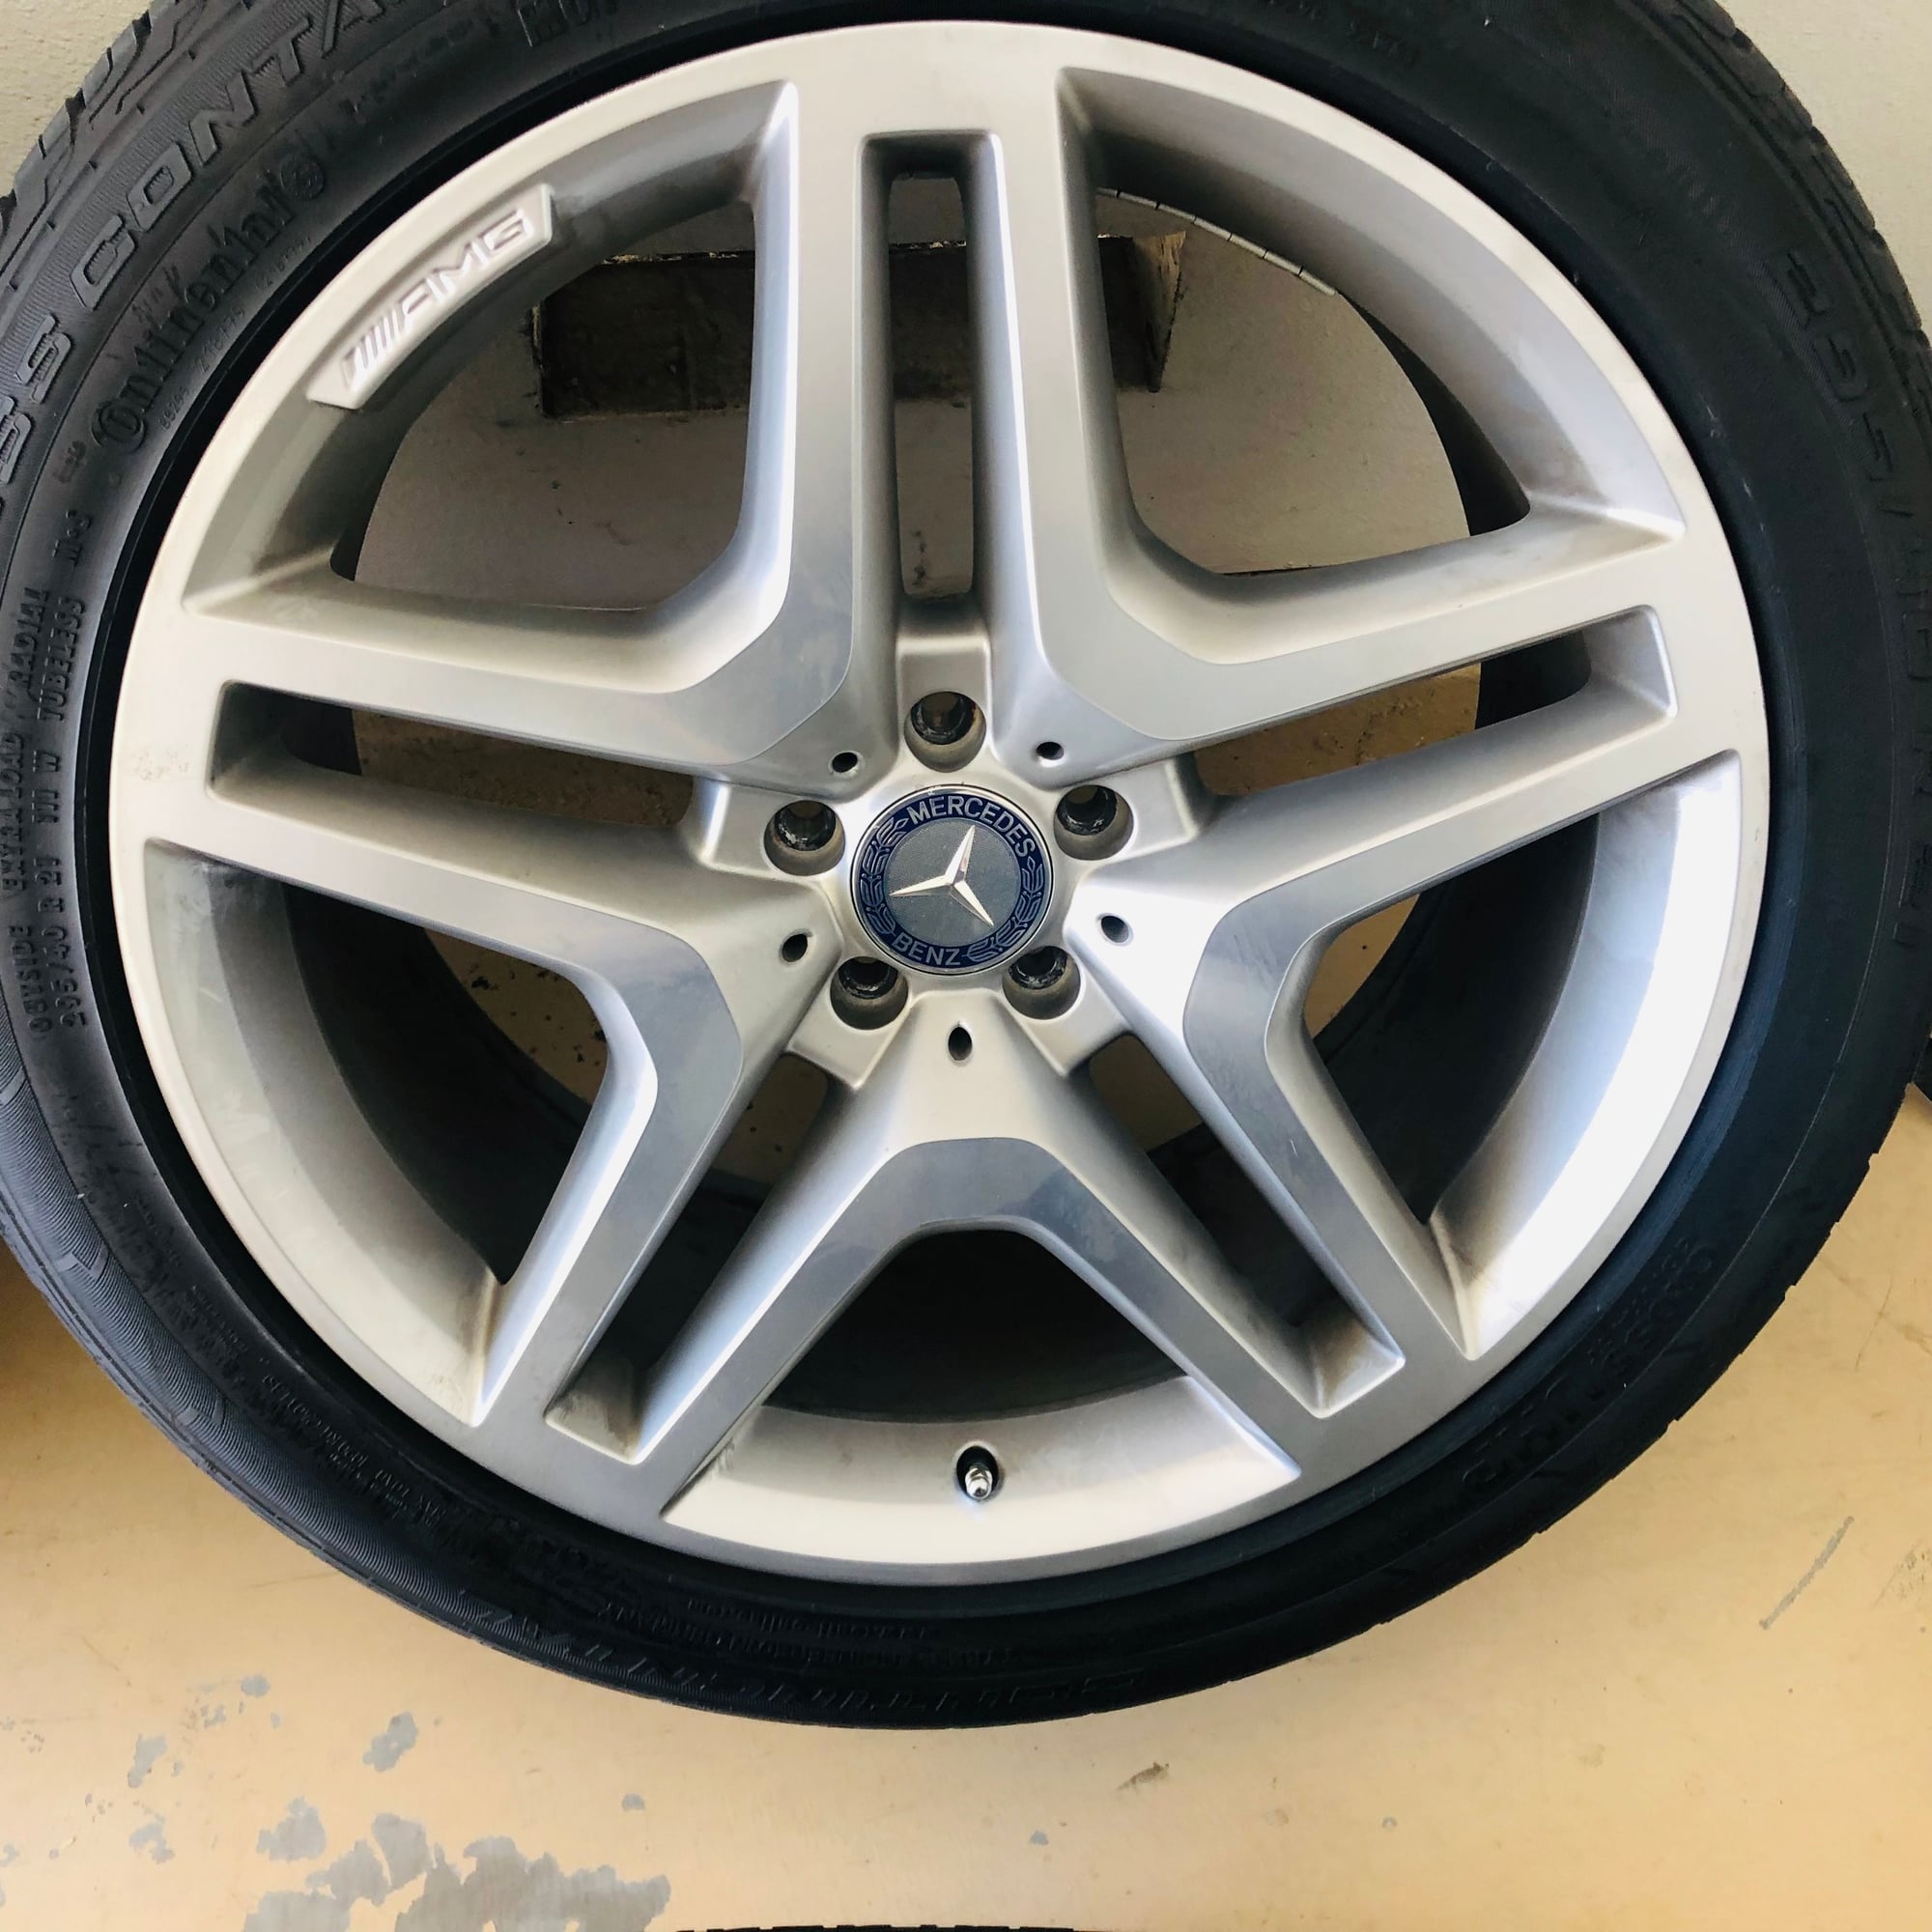 Wheels and Tires/Axles - GL 550 WHEELS AND TIRES - 21" AMG - PERFECT CONDITION - NO SCRATCHES - Used - All Years Mercedes-Benz GLE63 AMG S - All Years Mercedes-Benz GLE350d - All Years Mercedes-Benz GL320 - Irvine, CA 92618, United States